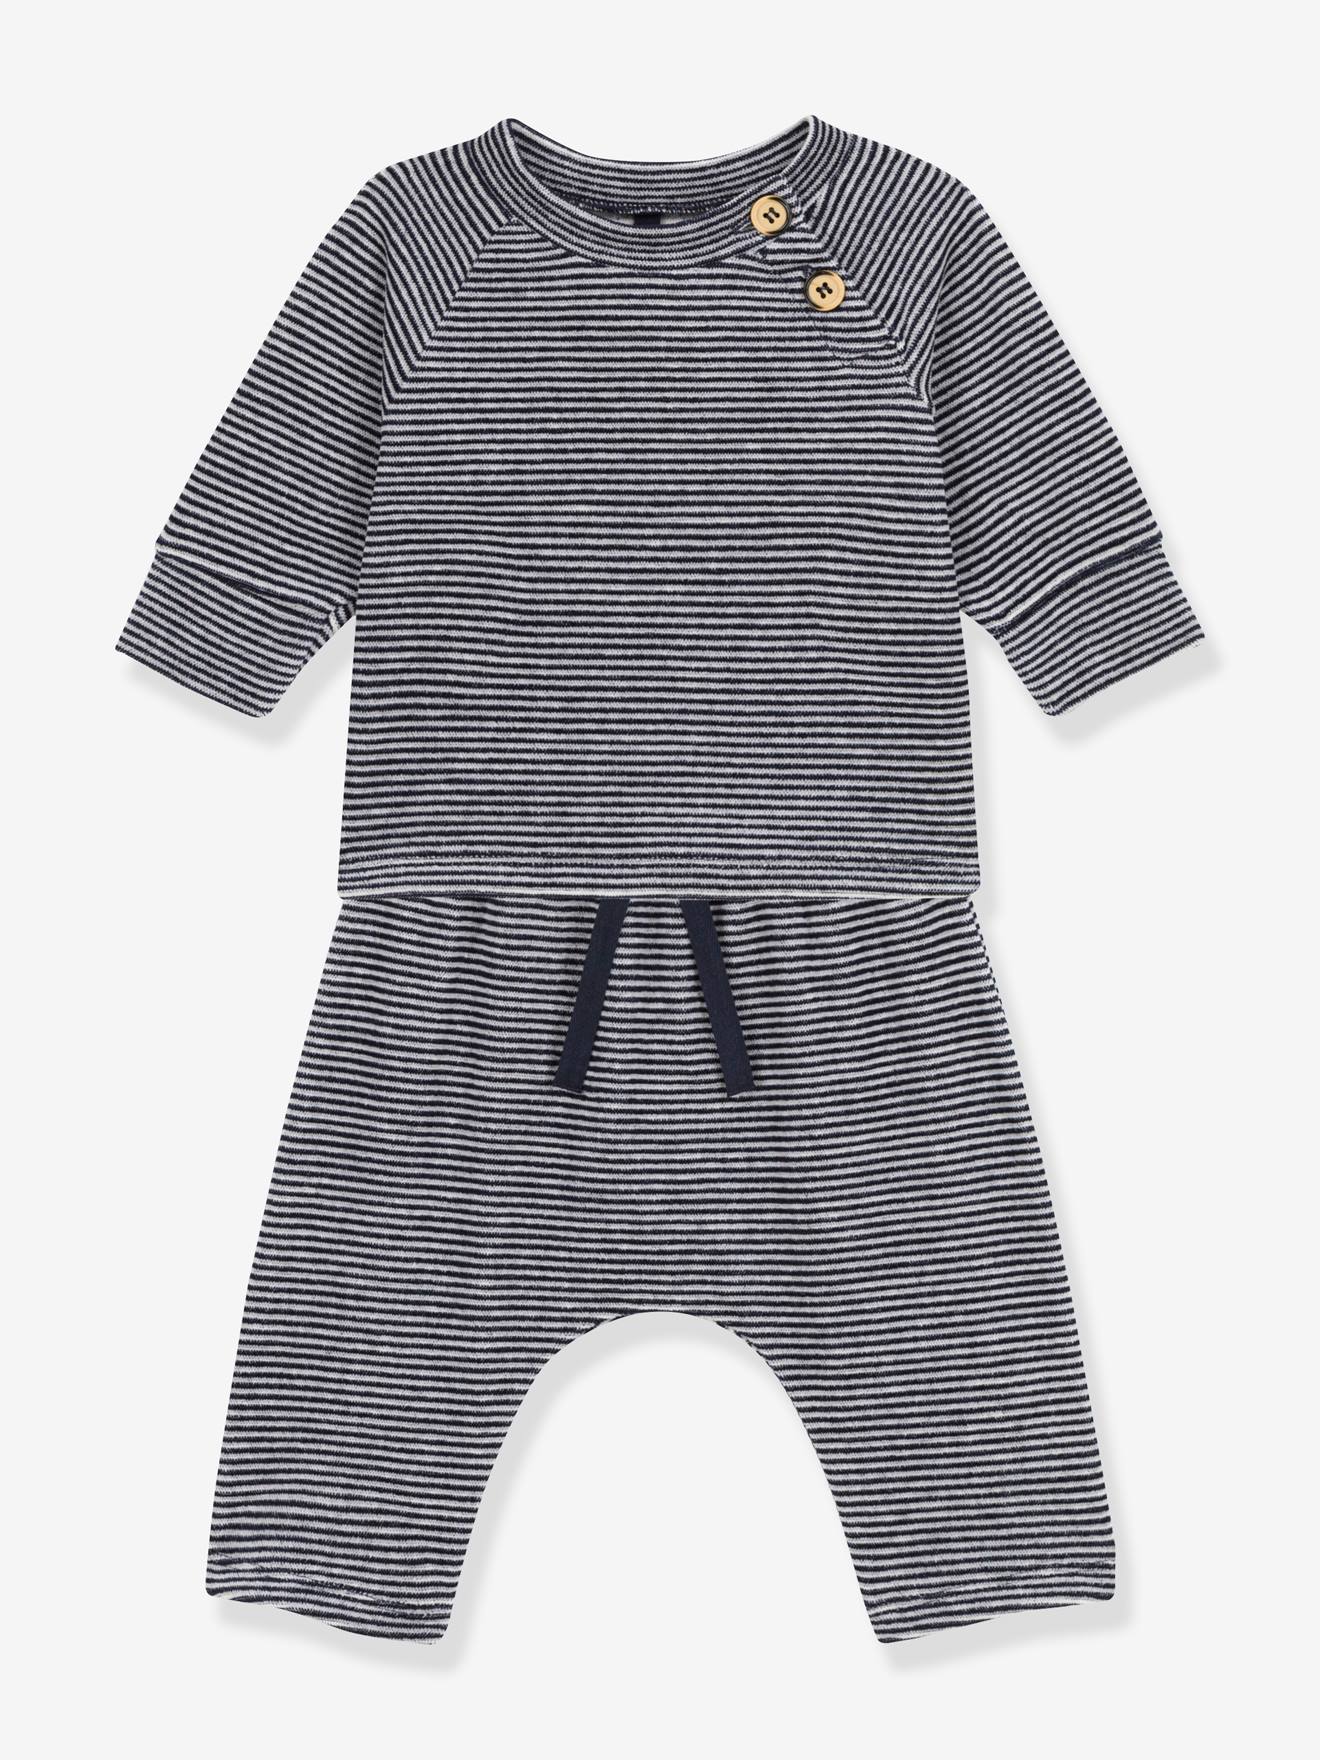 Petit Bateau Velour Striped Top and Pant Set in White/Navy NB